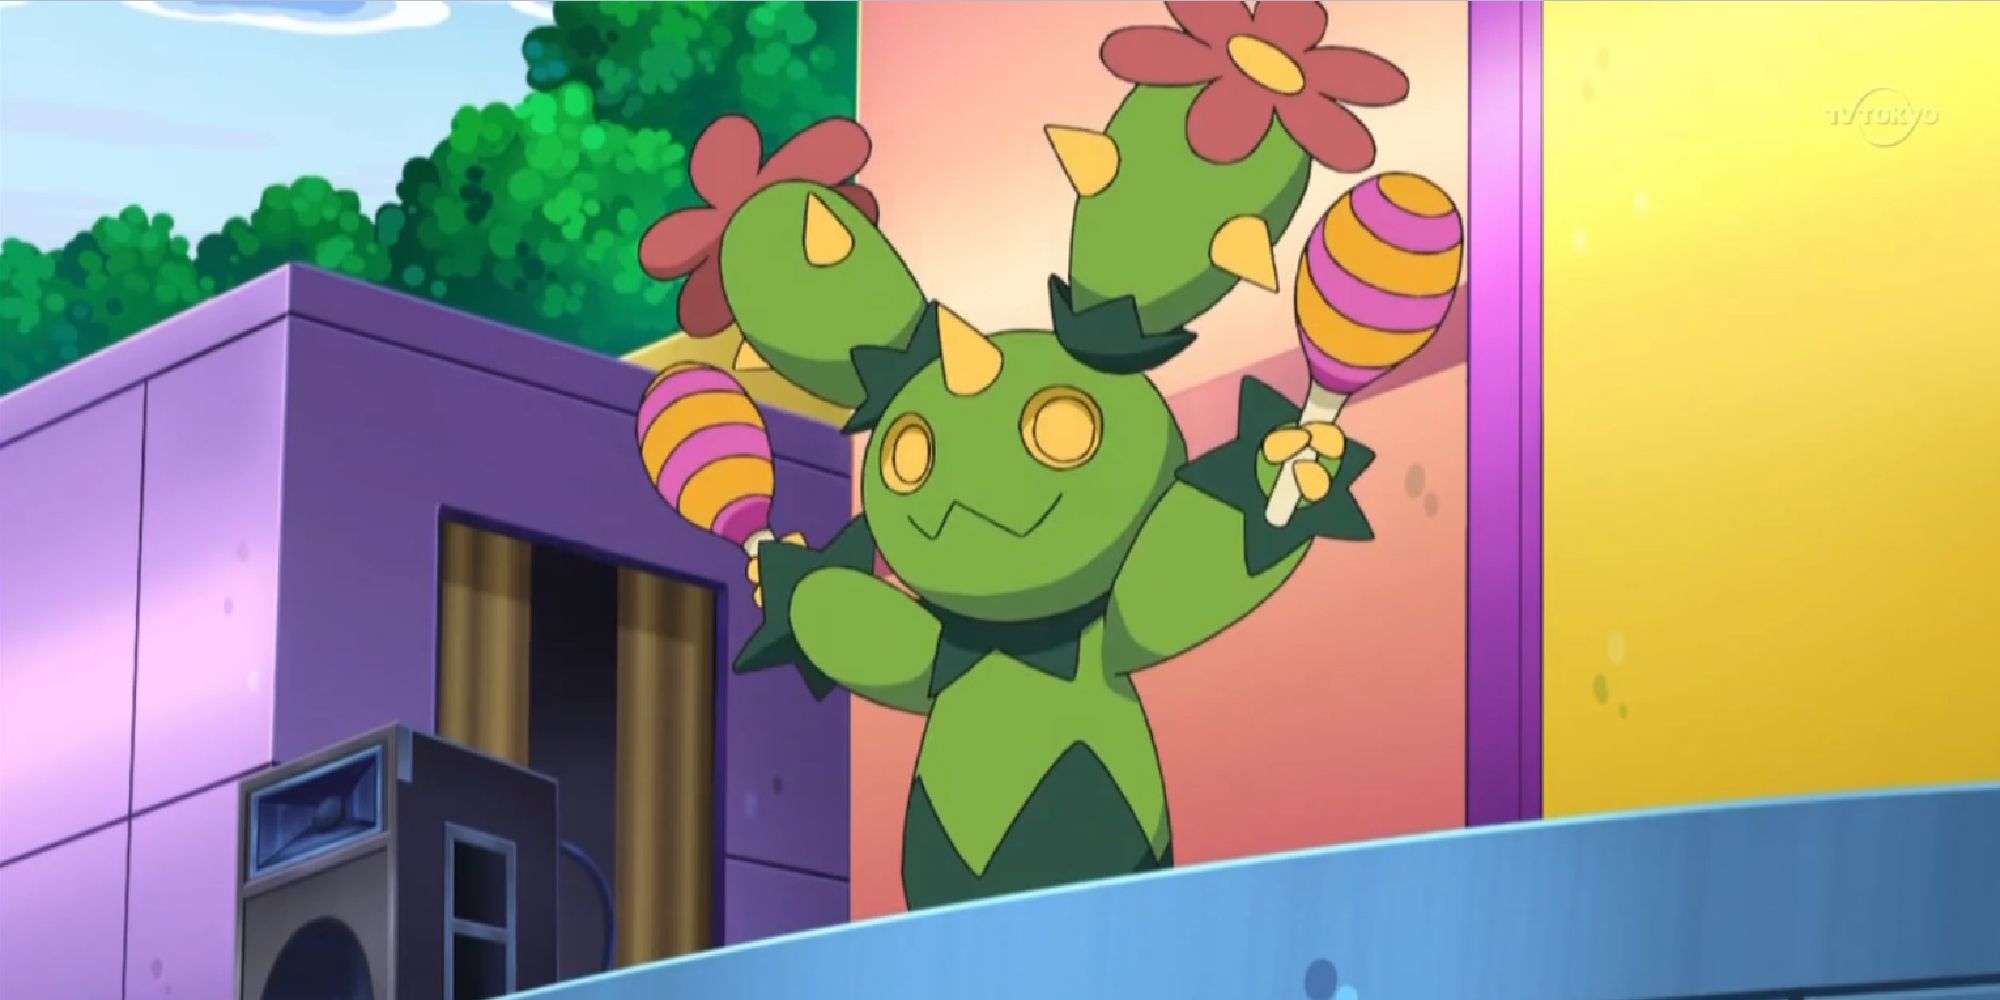 Maractus holding two maracas in a town in the anime